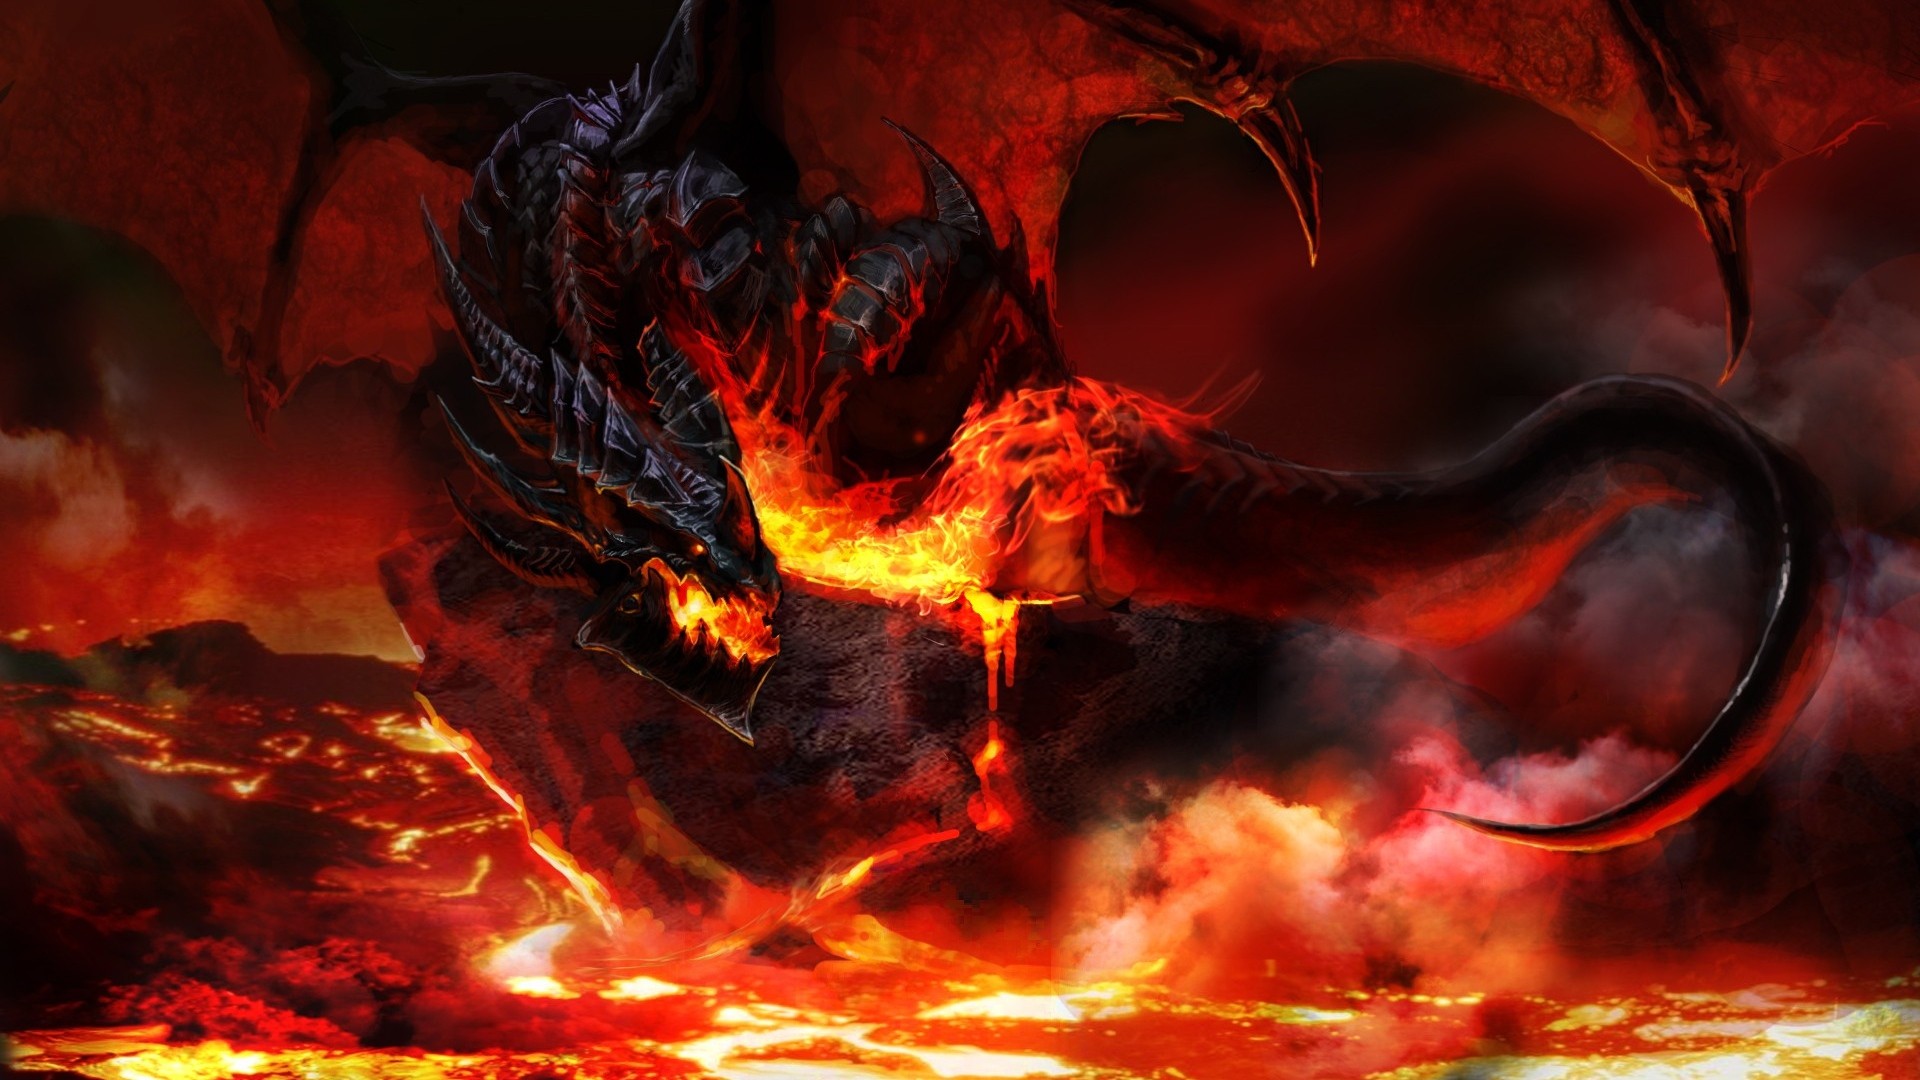 Dragon Fire Dragon Wings Wings Fantasy Art World Of Warcraft Video Games Deathwing 1920x1080